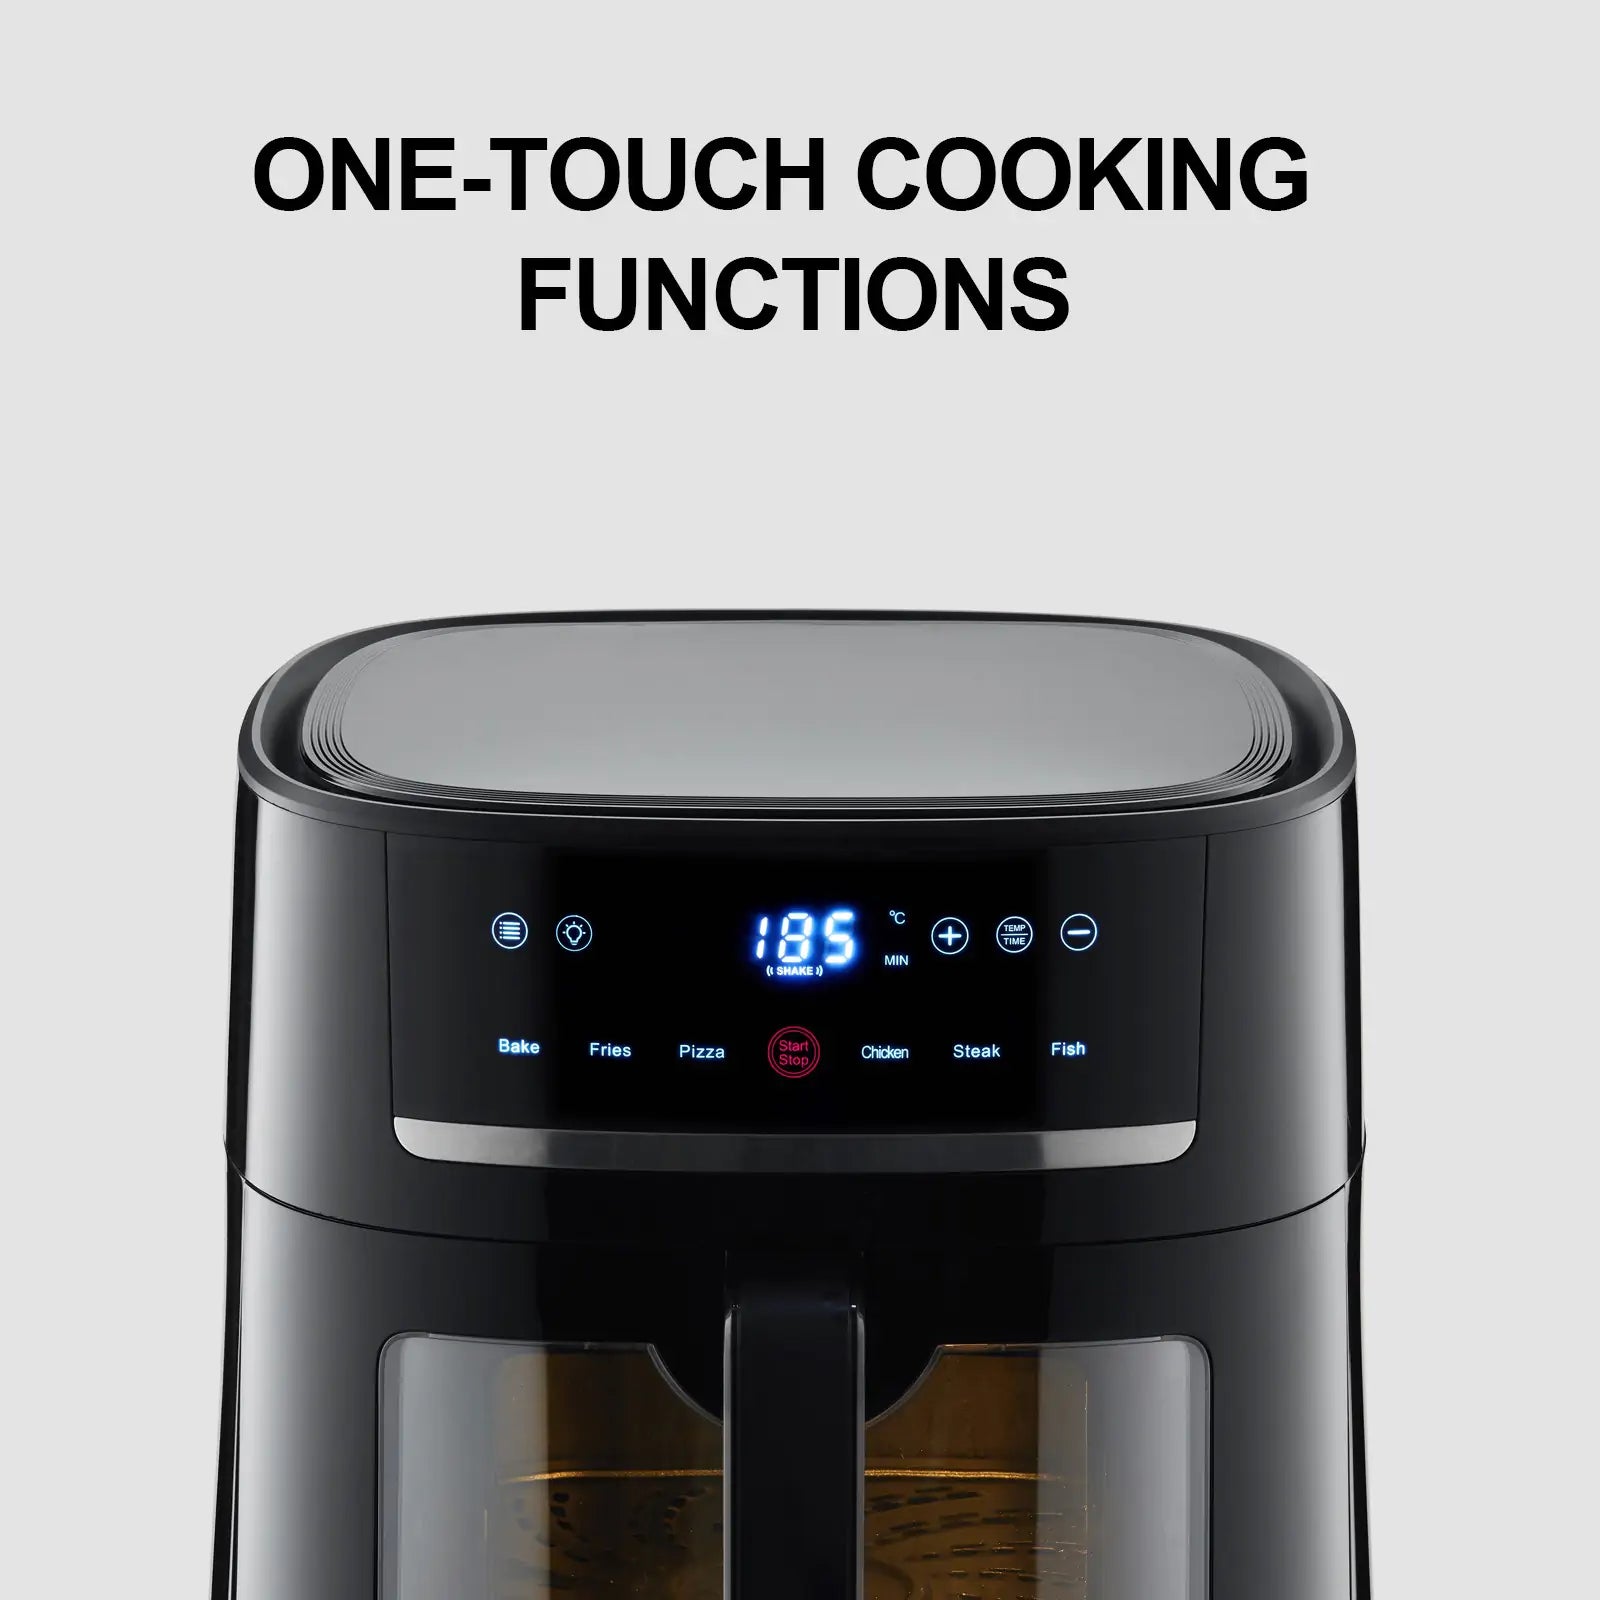 ForeSpy Xiaomi 1350W 4L Air Fryer Digital Touchscreen with 6 Presets Removable Basket Timer&Temperature Control for Oil Free & Low Fat Healthy Cooking